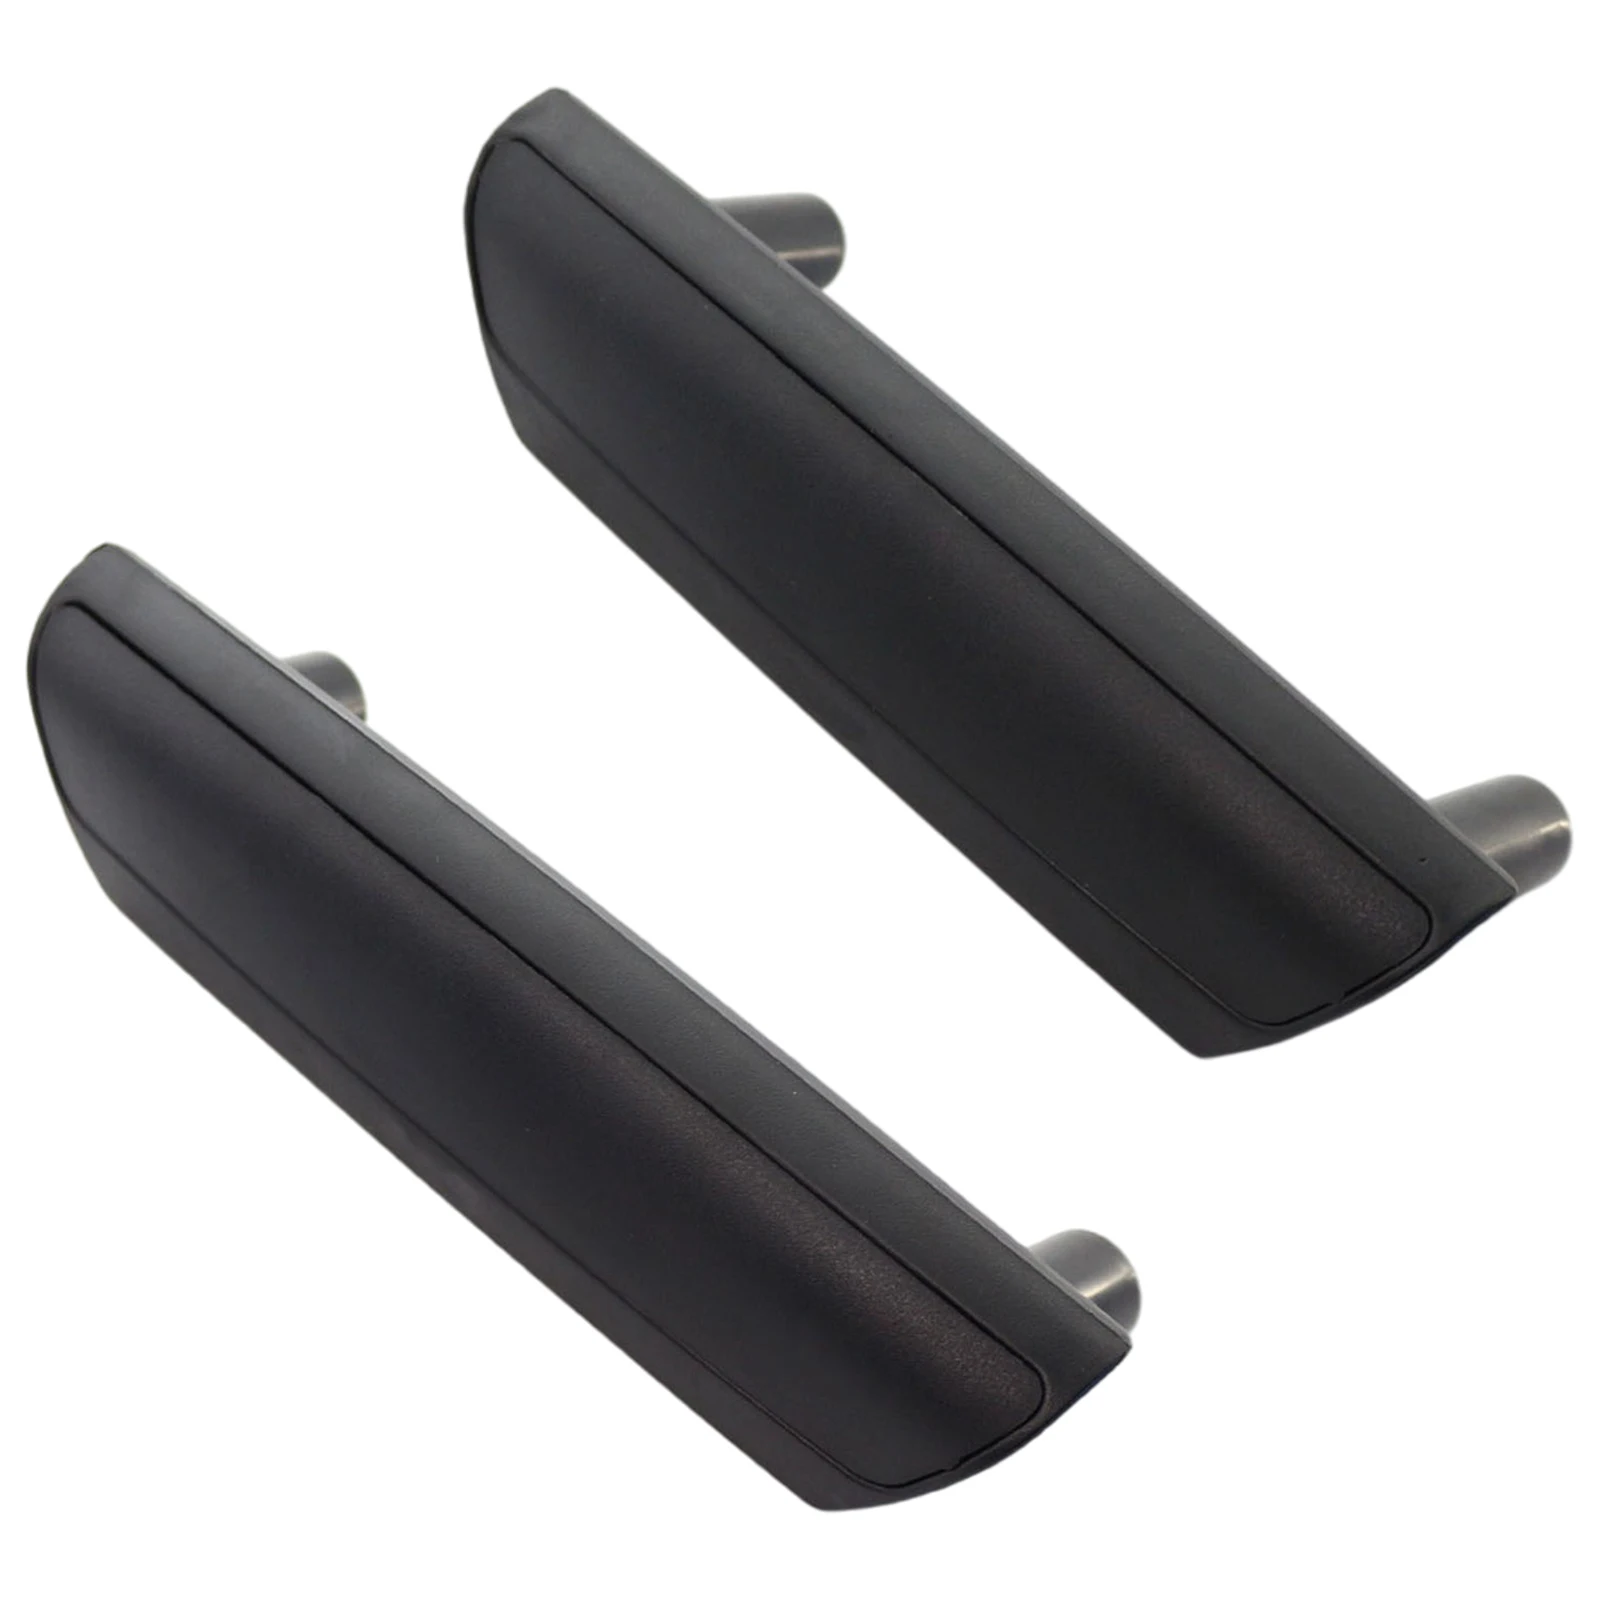 Interior Door Handle Grab Grip 7H0 867 179 7H0 867 180 Fit for Transporter T5 2003+ Replacement Parts Accessories